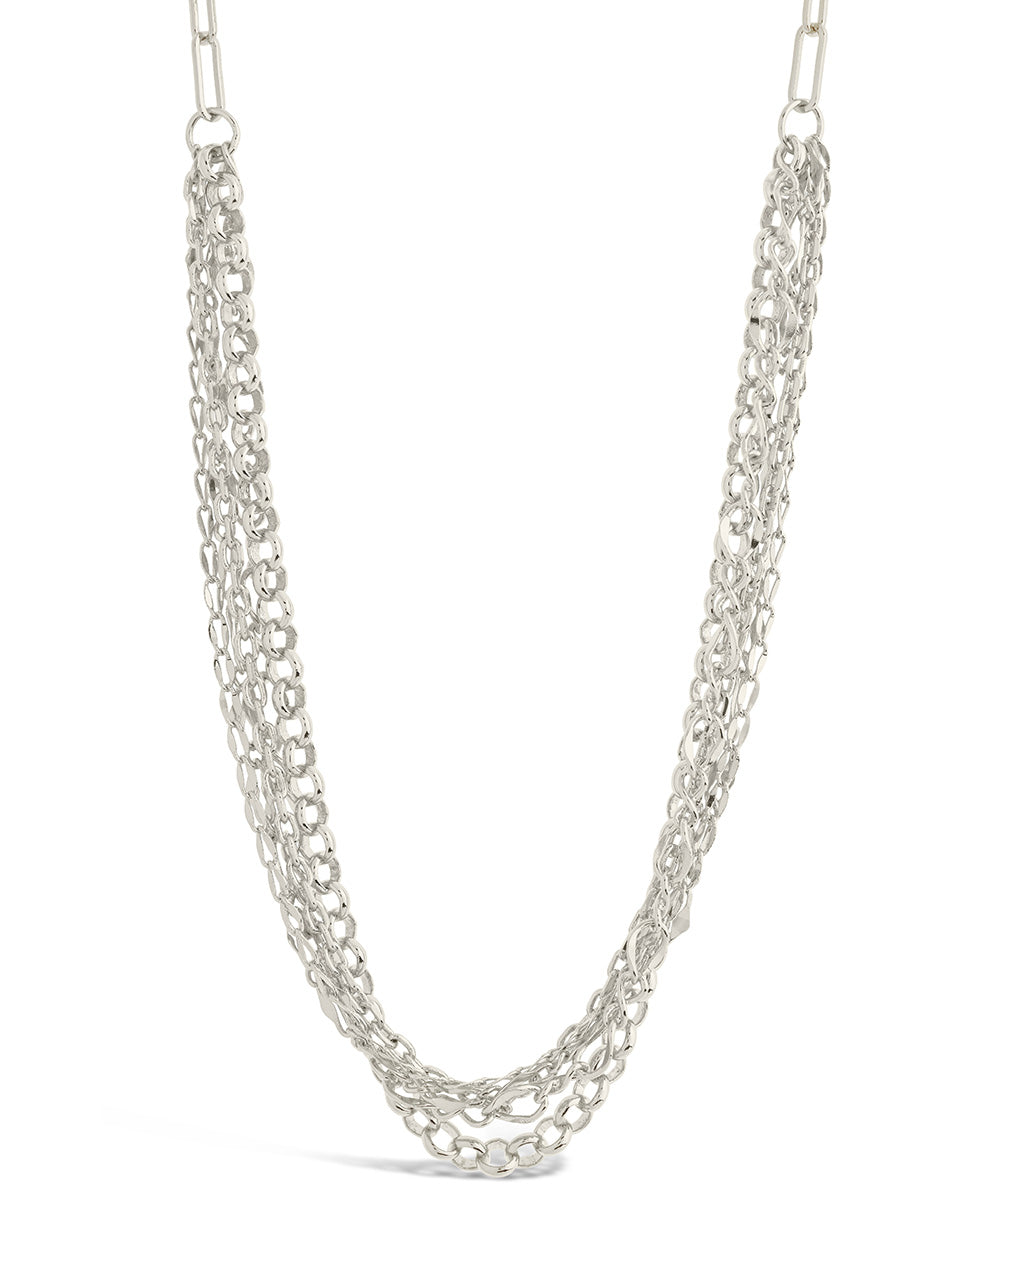 Hadleigh Layered Necklace Necklace Sterling Forever Silver 